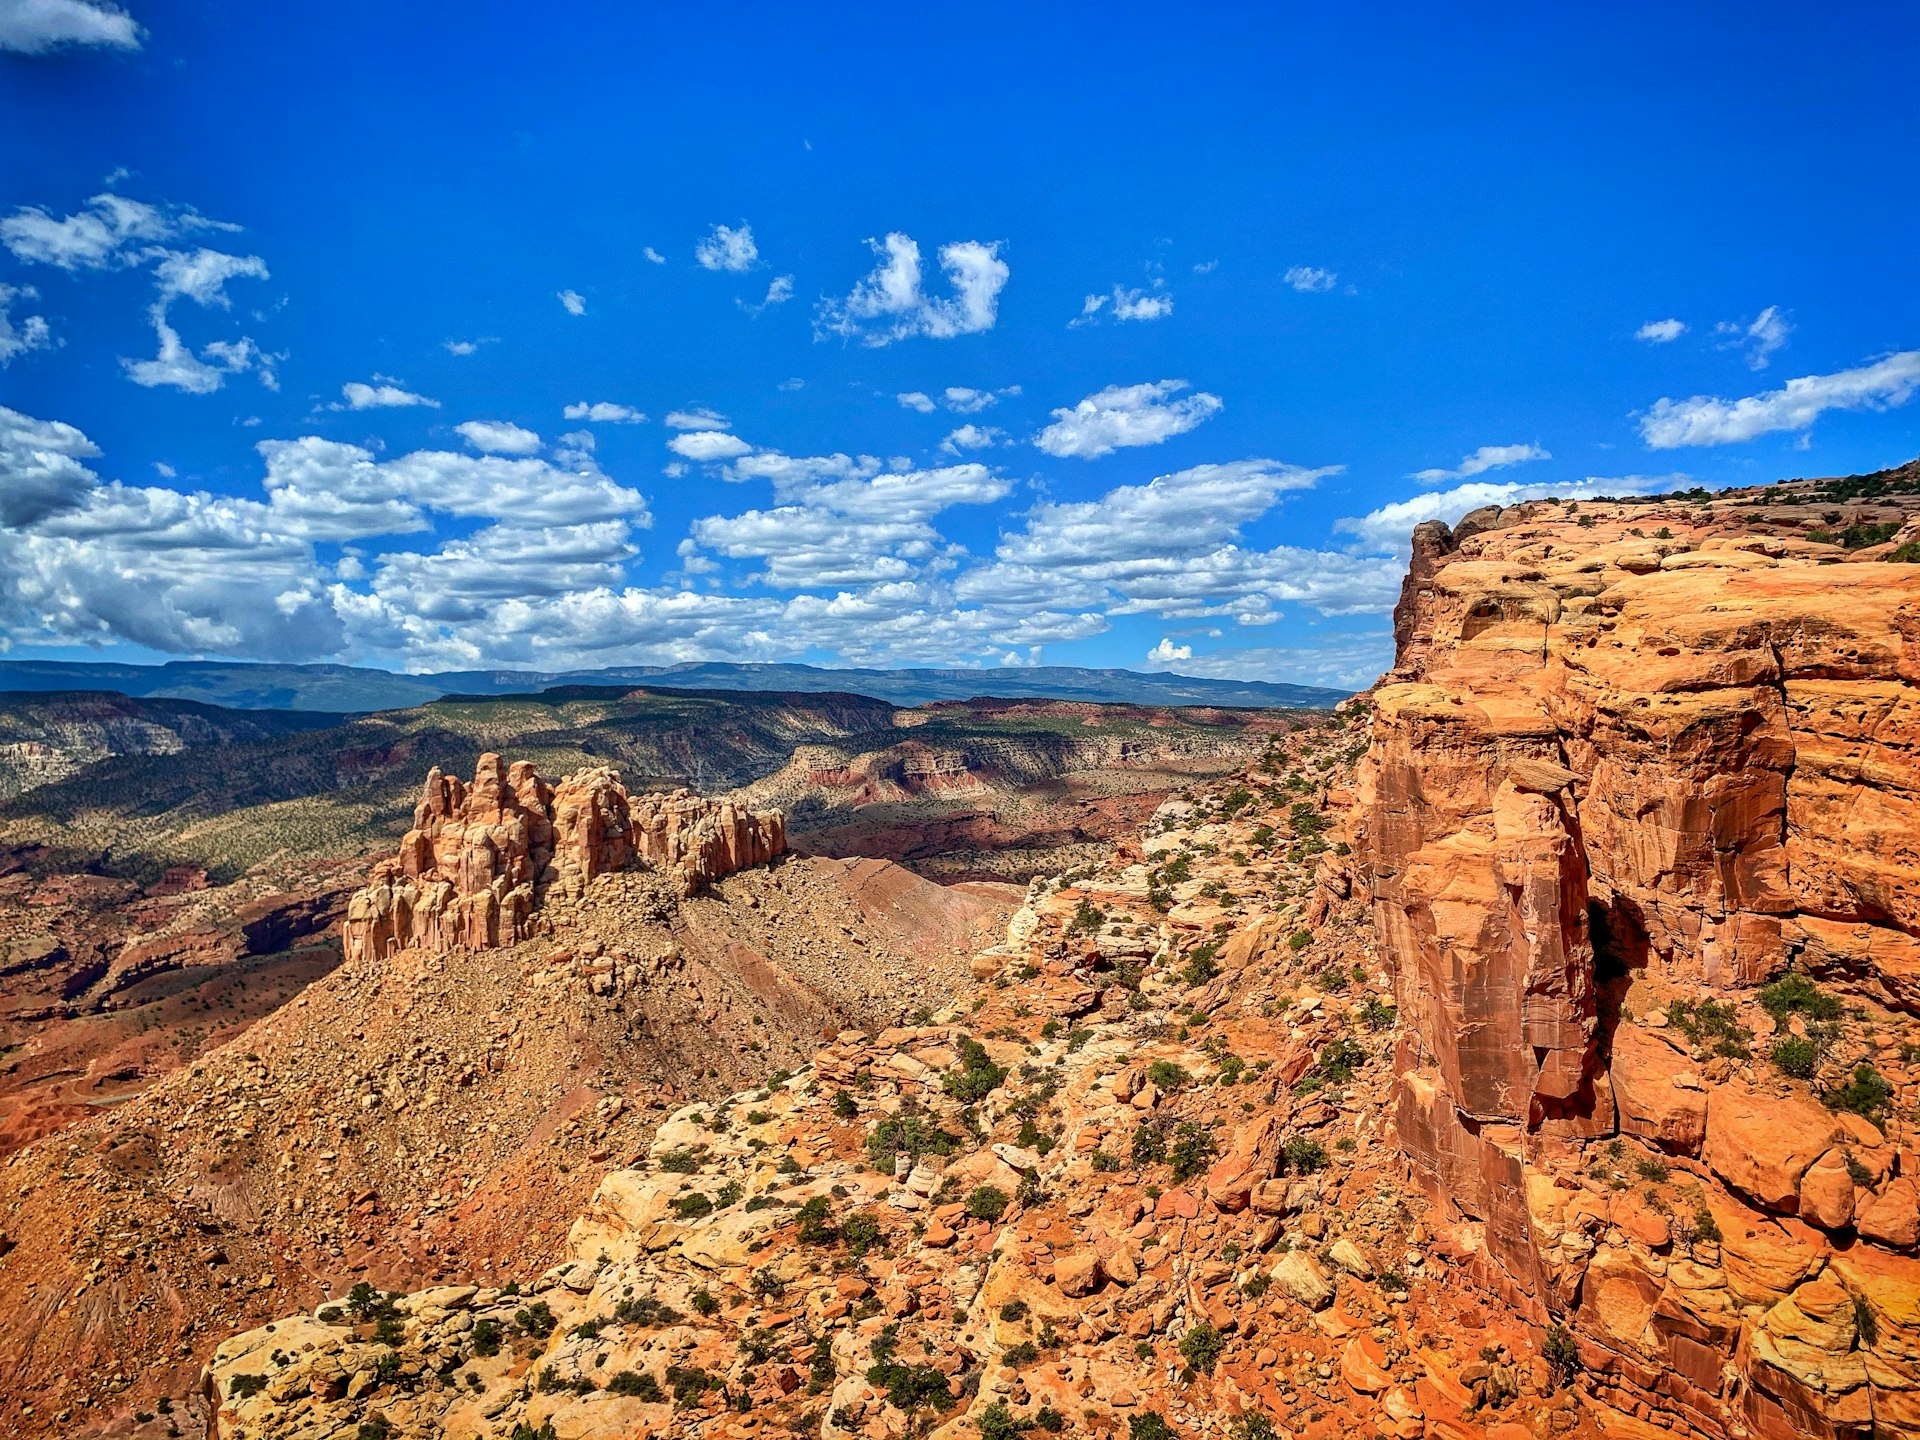 The red-rocked mountainous terrain of Capitol Reef National Park in Utah with cloud-scattered blue sky above